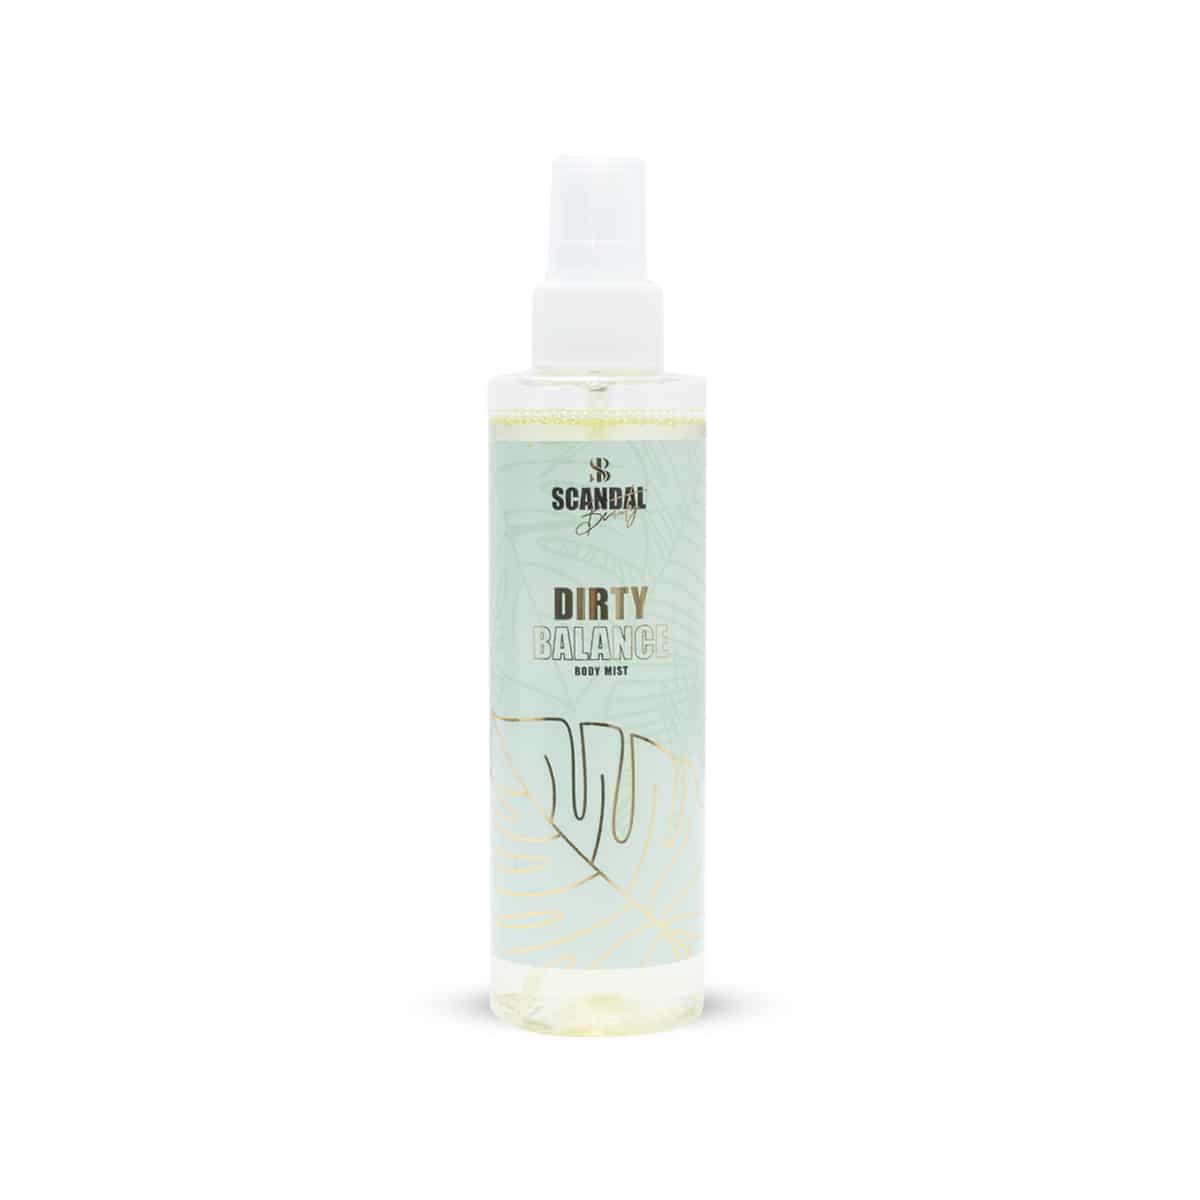 Scandal beauty body mist DIRTY BALANCE with banana coconut scent 200ml